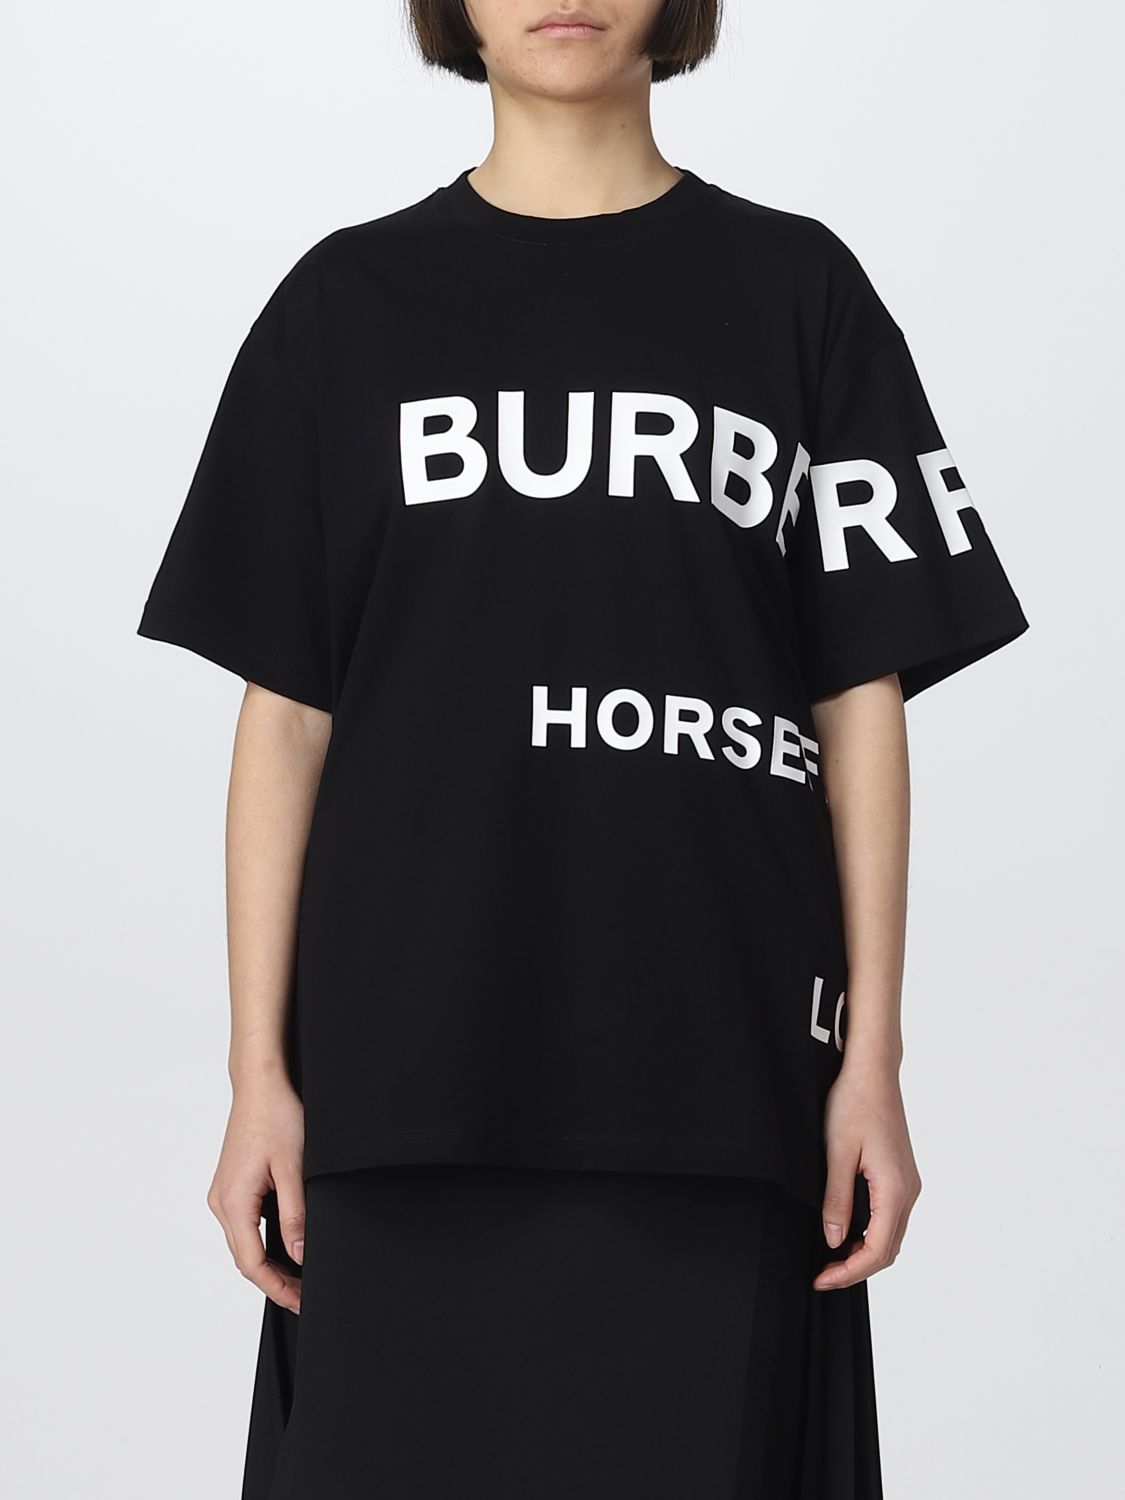 T-Shirt For Women - Black | Burberry T-Shirt 8040764 Online On Giglio.Com